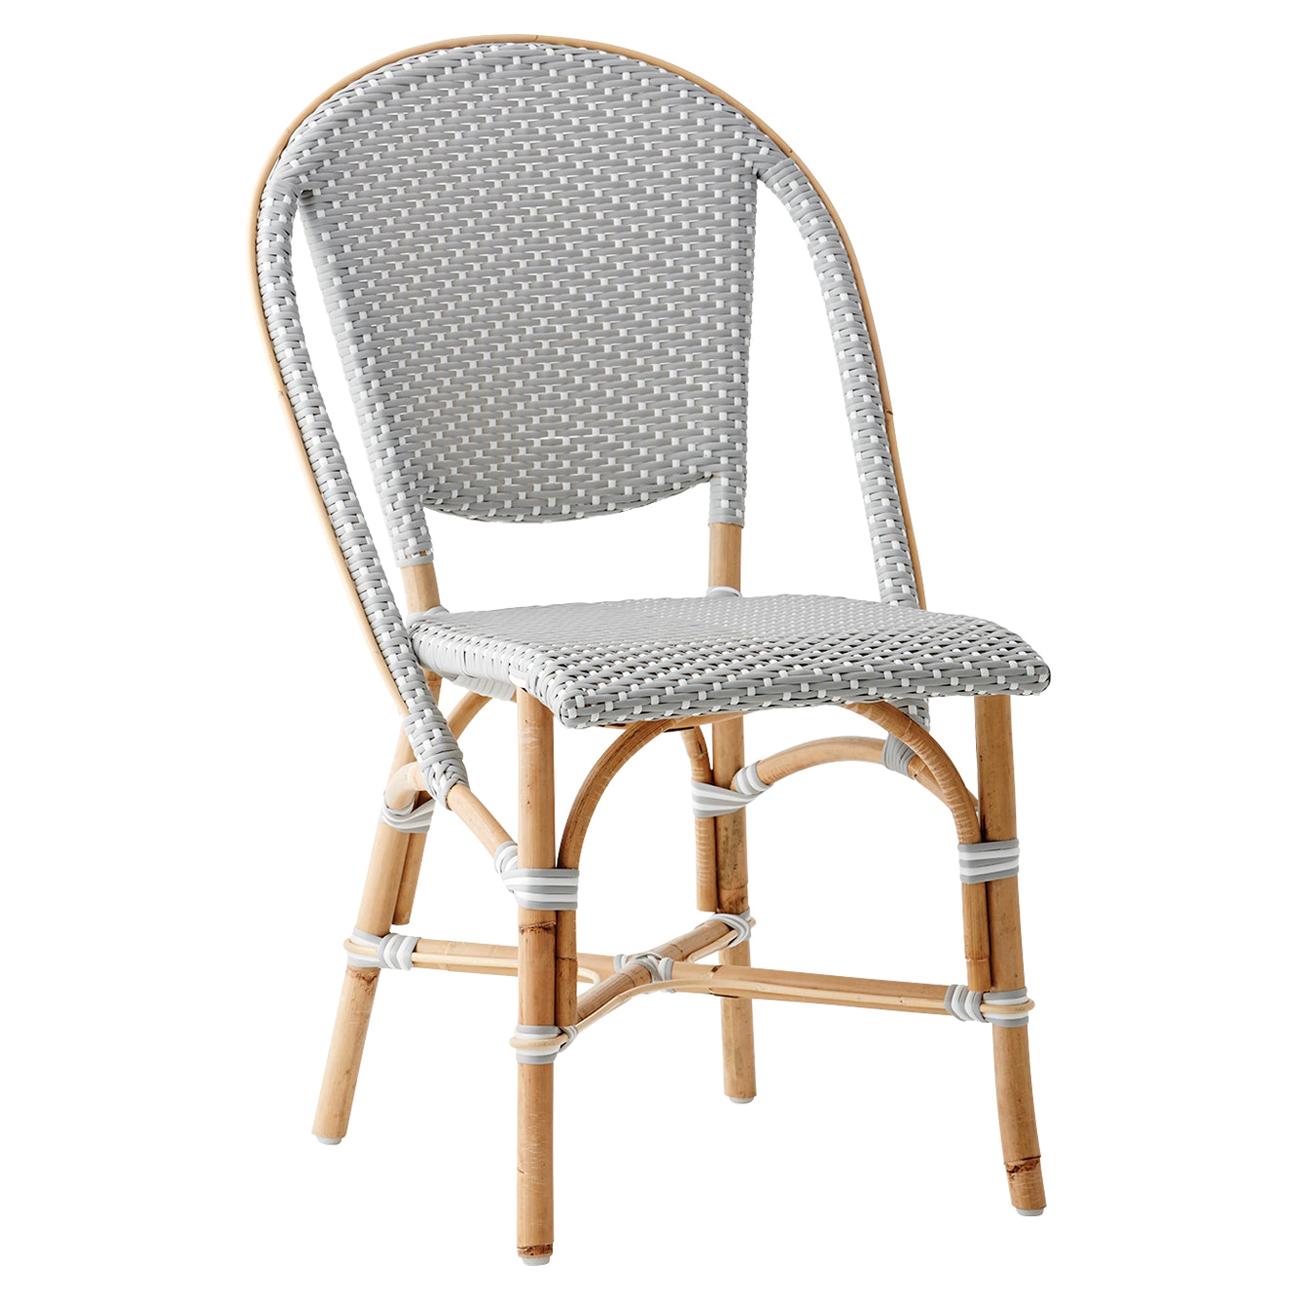 Sika Design Sofie Woven Rattan Bistro Side Chair in Grey with White Dots